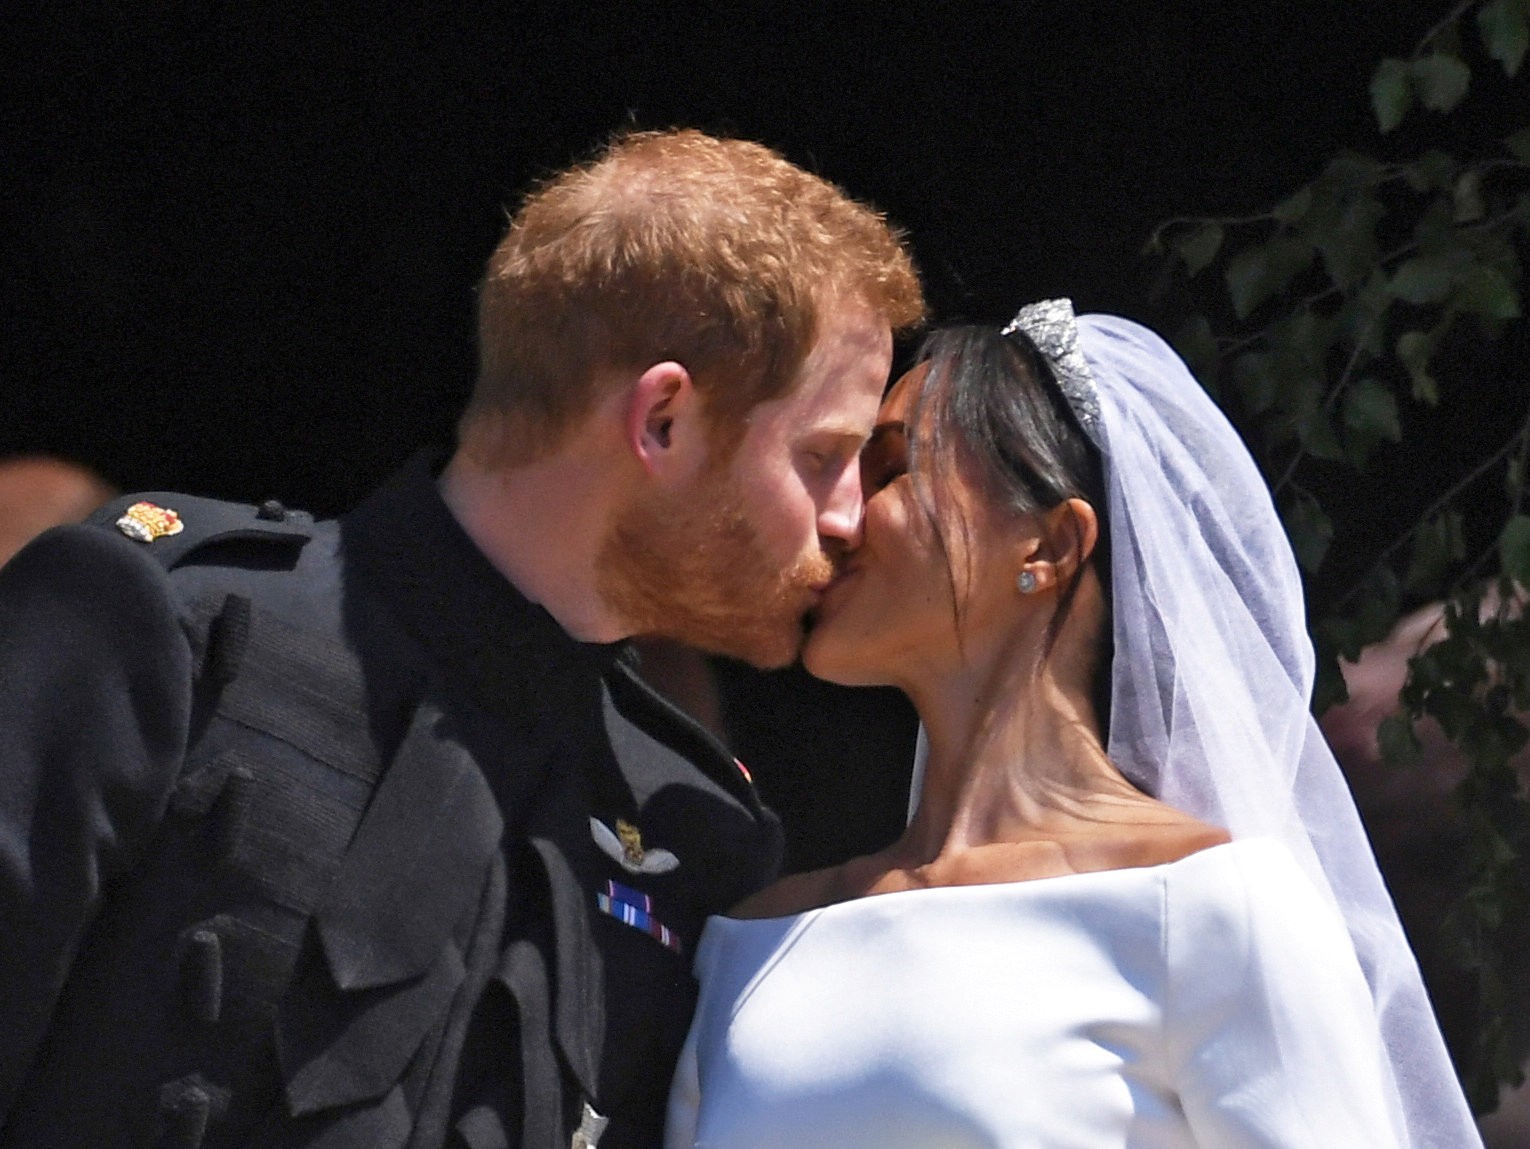 The wedding marked a new chapter in the storied British monarchy: the introduction of an American woman with a biracial background to its upper ranks. Here’s how it went down